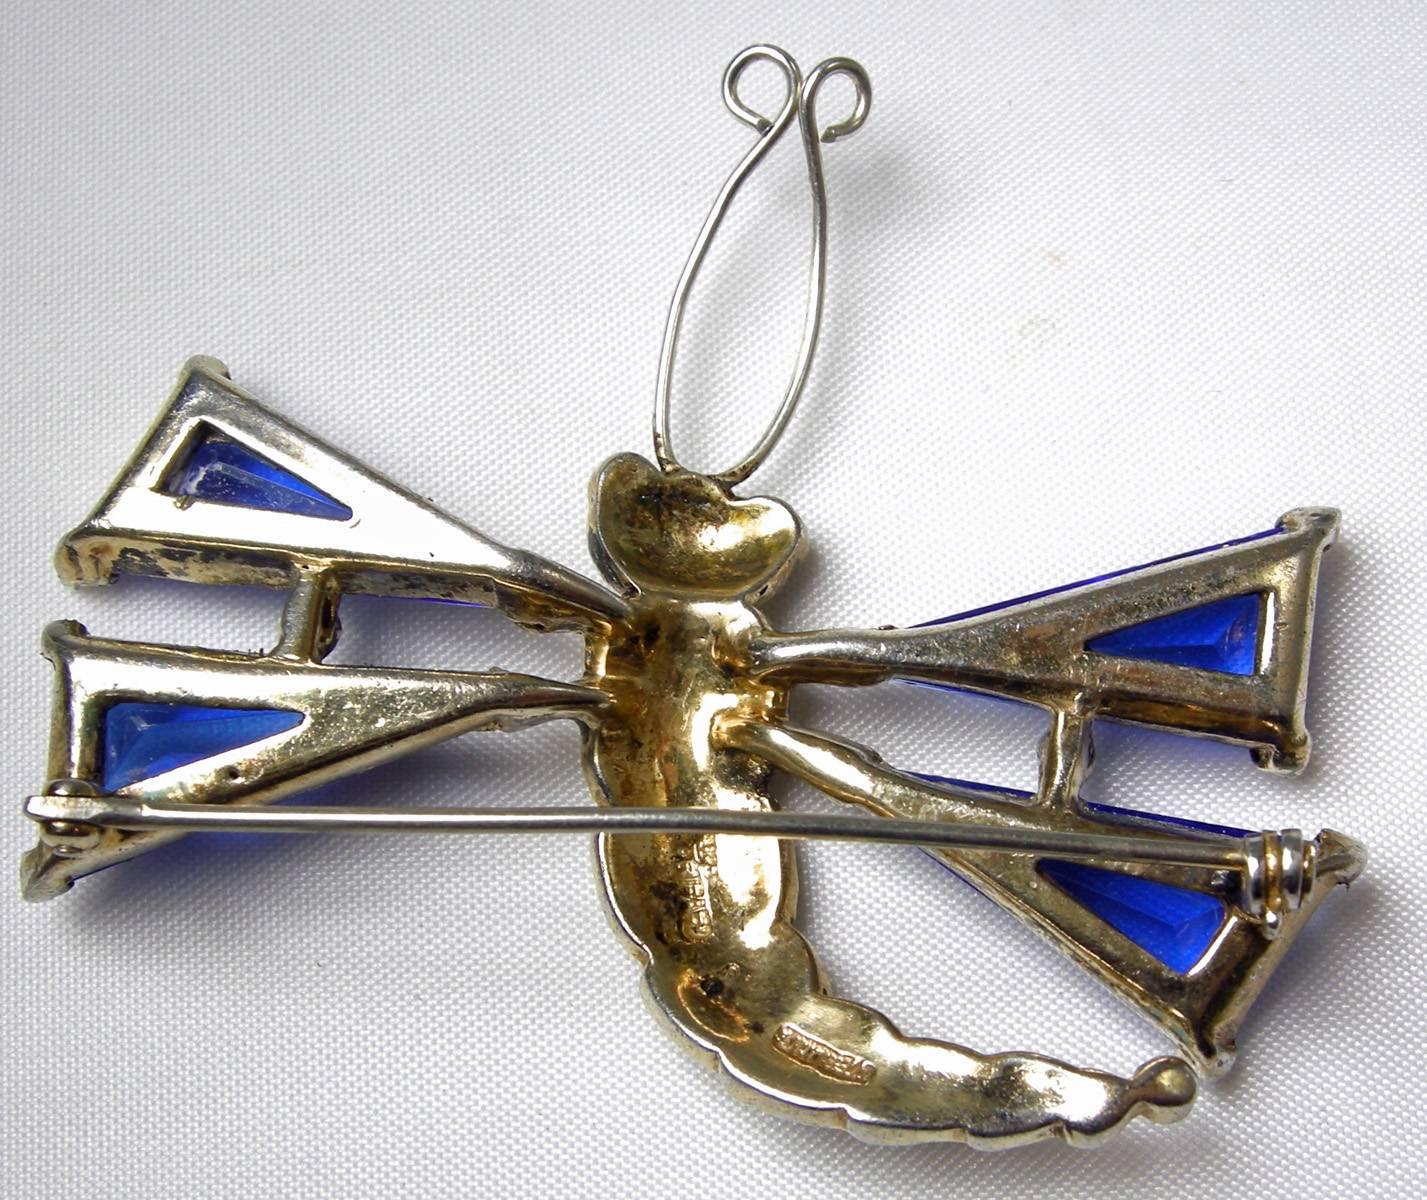 This is one of the most collectible Trifari’s from the 1940s.  It is sterling silver with a gold vermeil (some of the vermeil has faded, but does not take away the beauty of this piece at all.)  The blue glass wings of the dragonfly are triangular